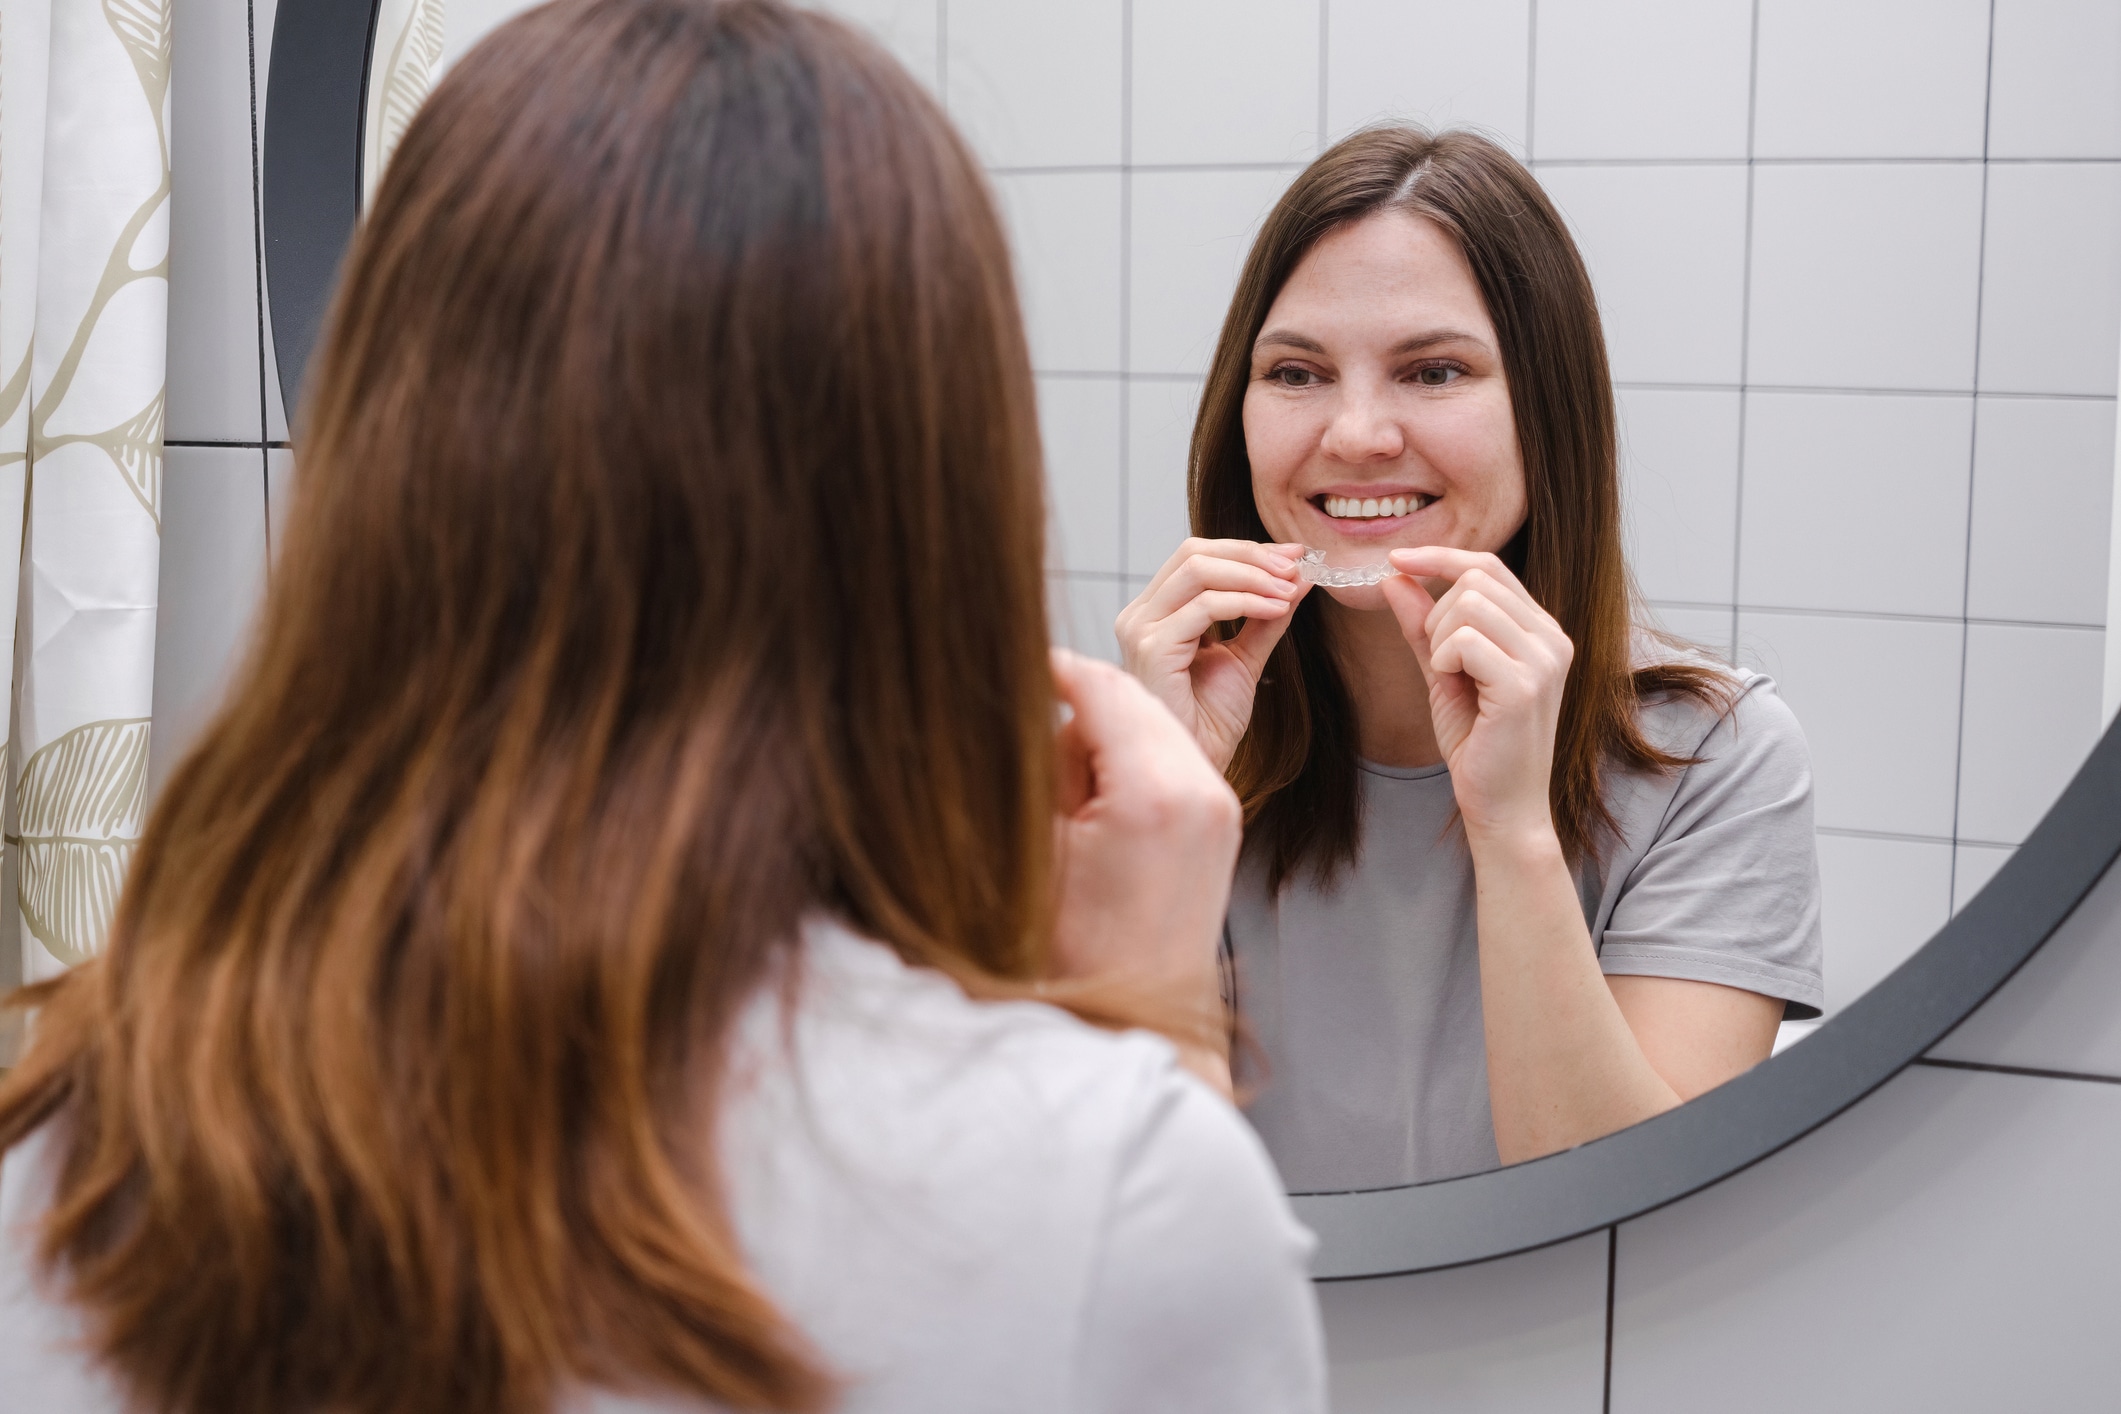 A widely smiling woman in front of a mirror in the bathroom holding invisible plastic teeth aligners in hands. Putting on braces. Beautiful and healthy smile.